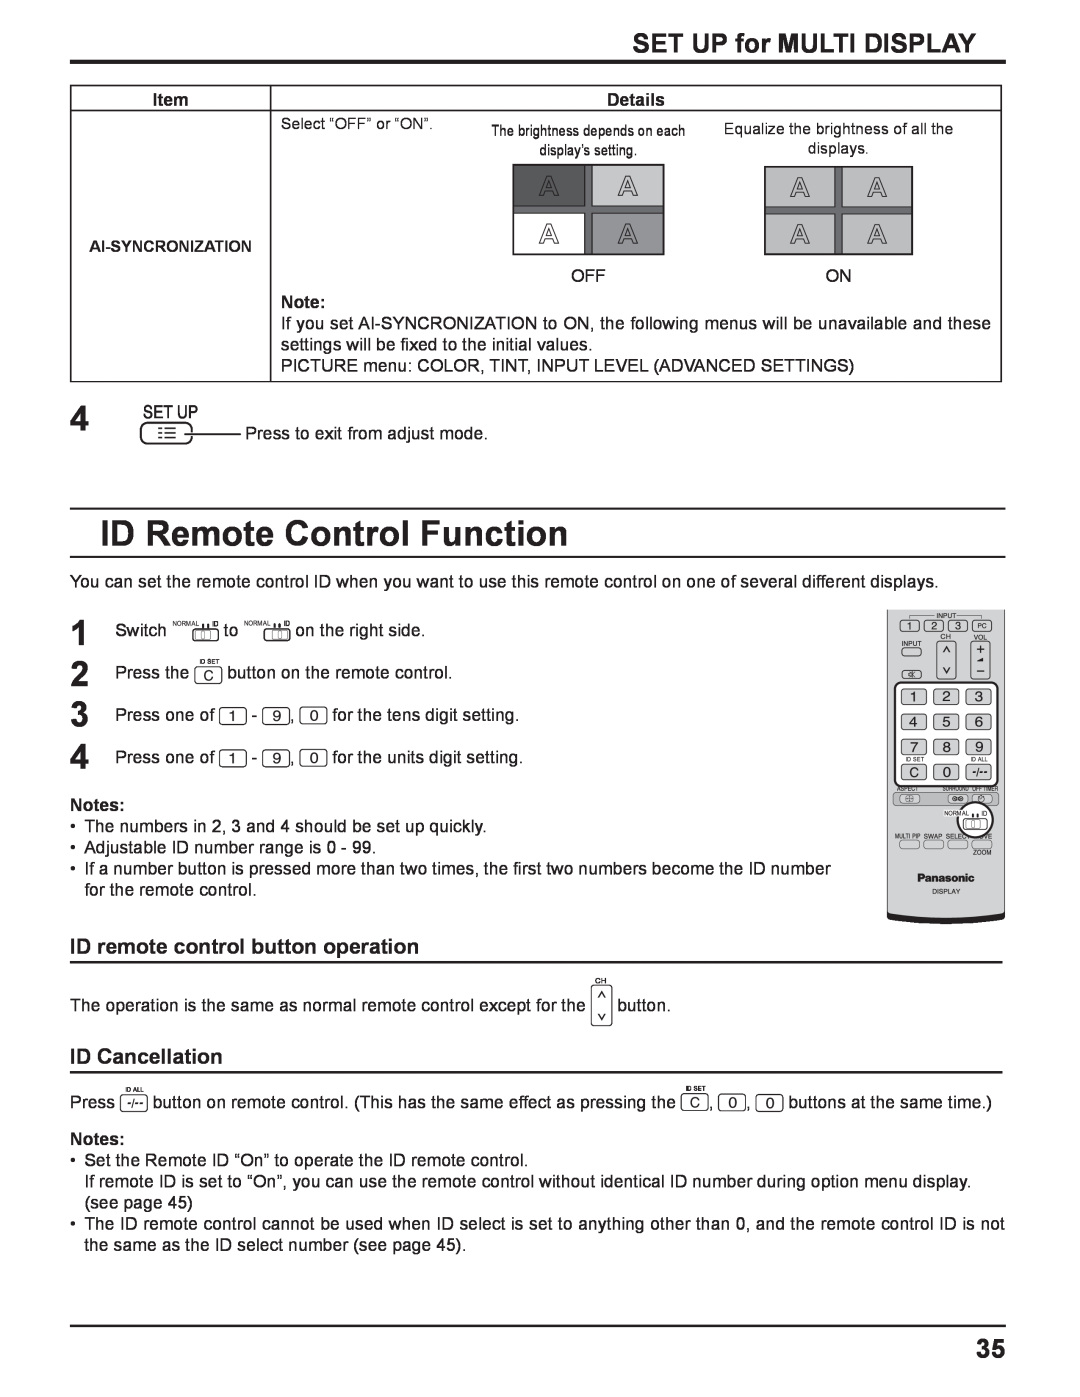 Panasonic TH-42PF11UK ID Remote Control Function, SET UP for MULTI DISPLAY, ID remote control button operation, Details 